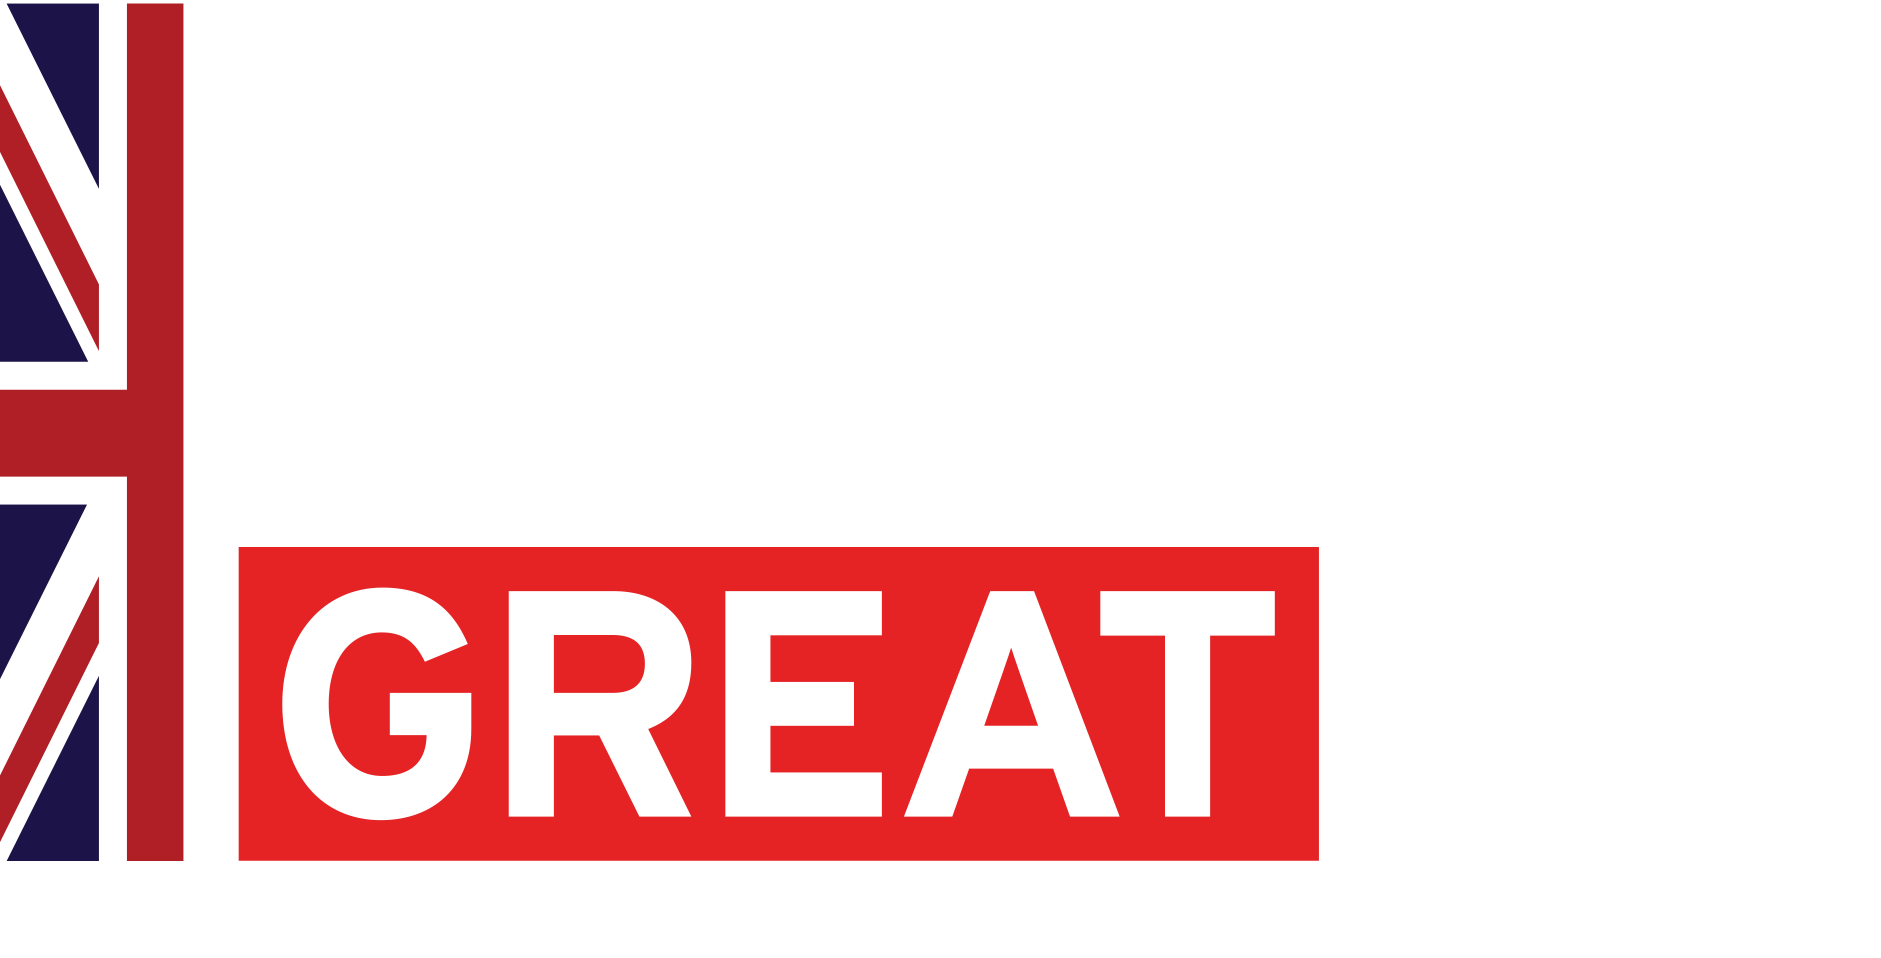 Proud to support - Exporting is great